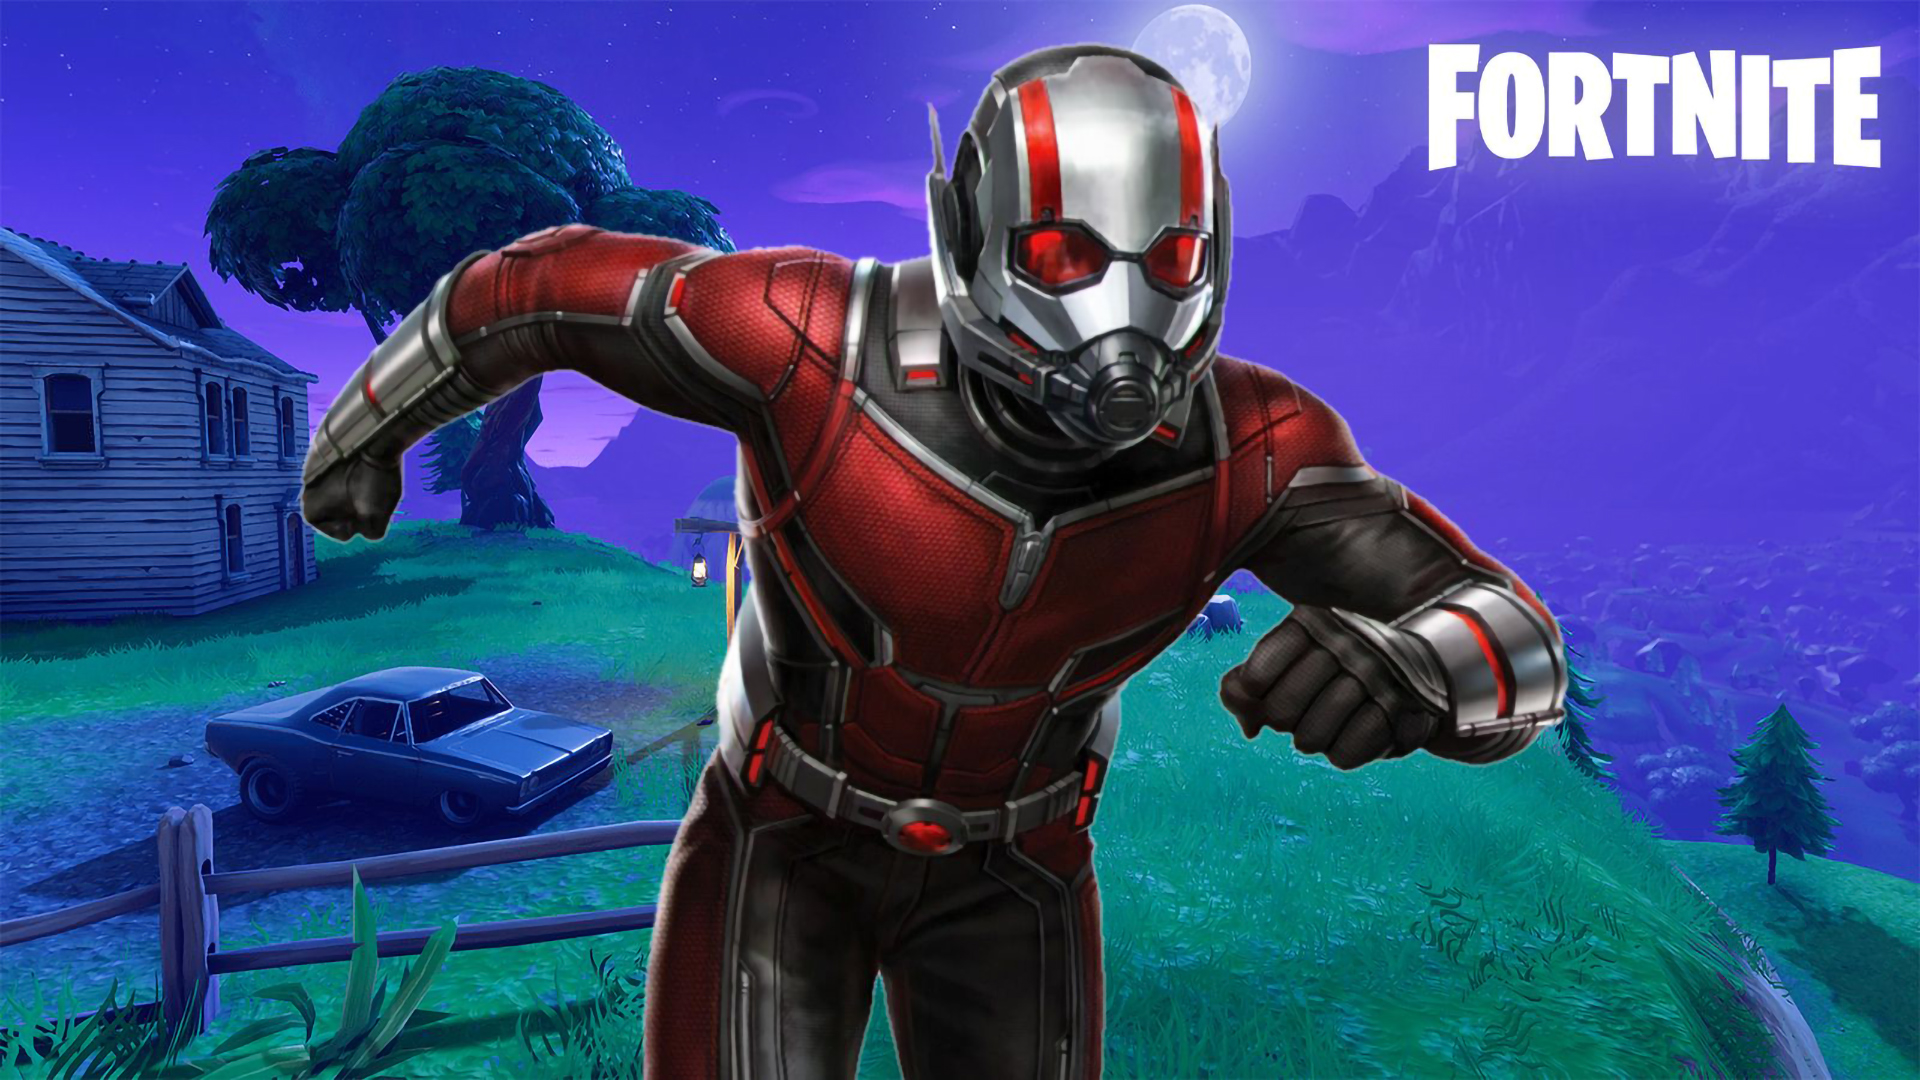 3400x450020 Ant-Man Fortnite Marvel Comics 3400x450020 Resolution Wallpaper,  HD Games 4K Wallpapers, Images, Photos and Background - Wallpapers Den